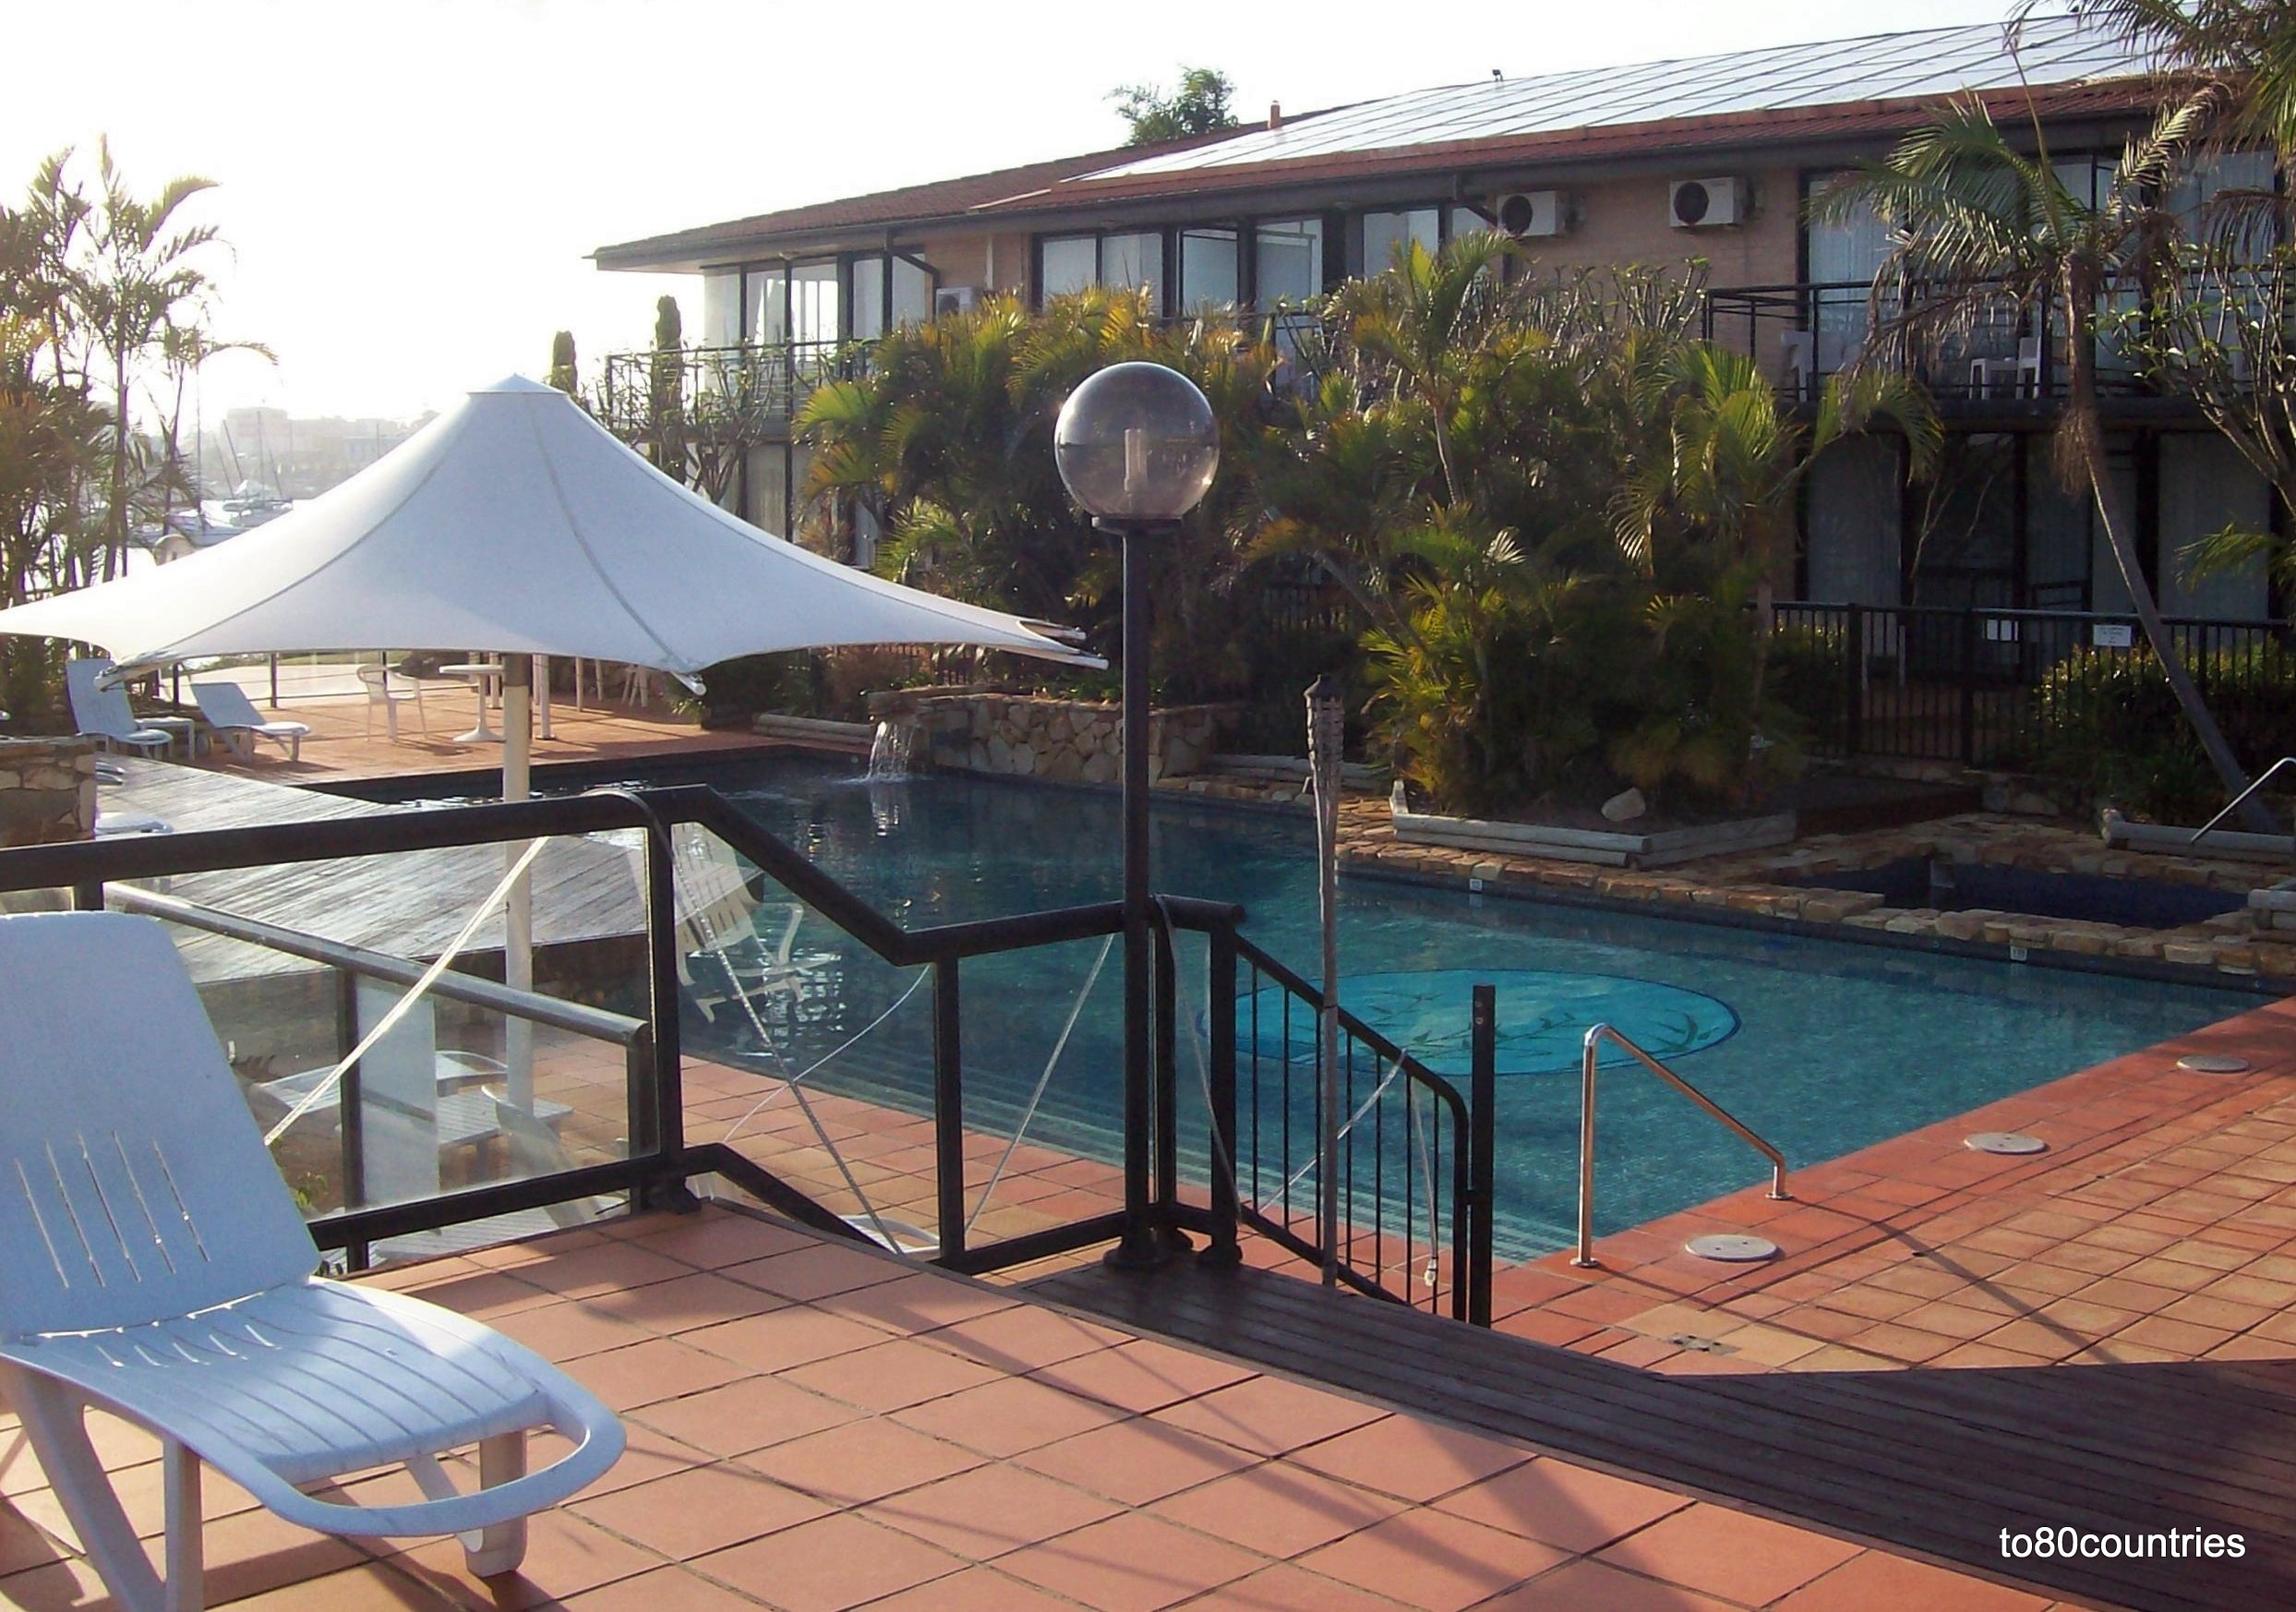 Resort Sails in Port Macquarie - New South Wales